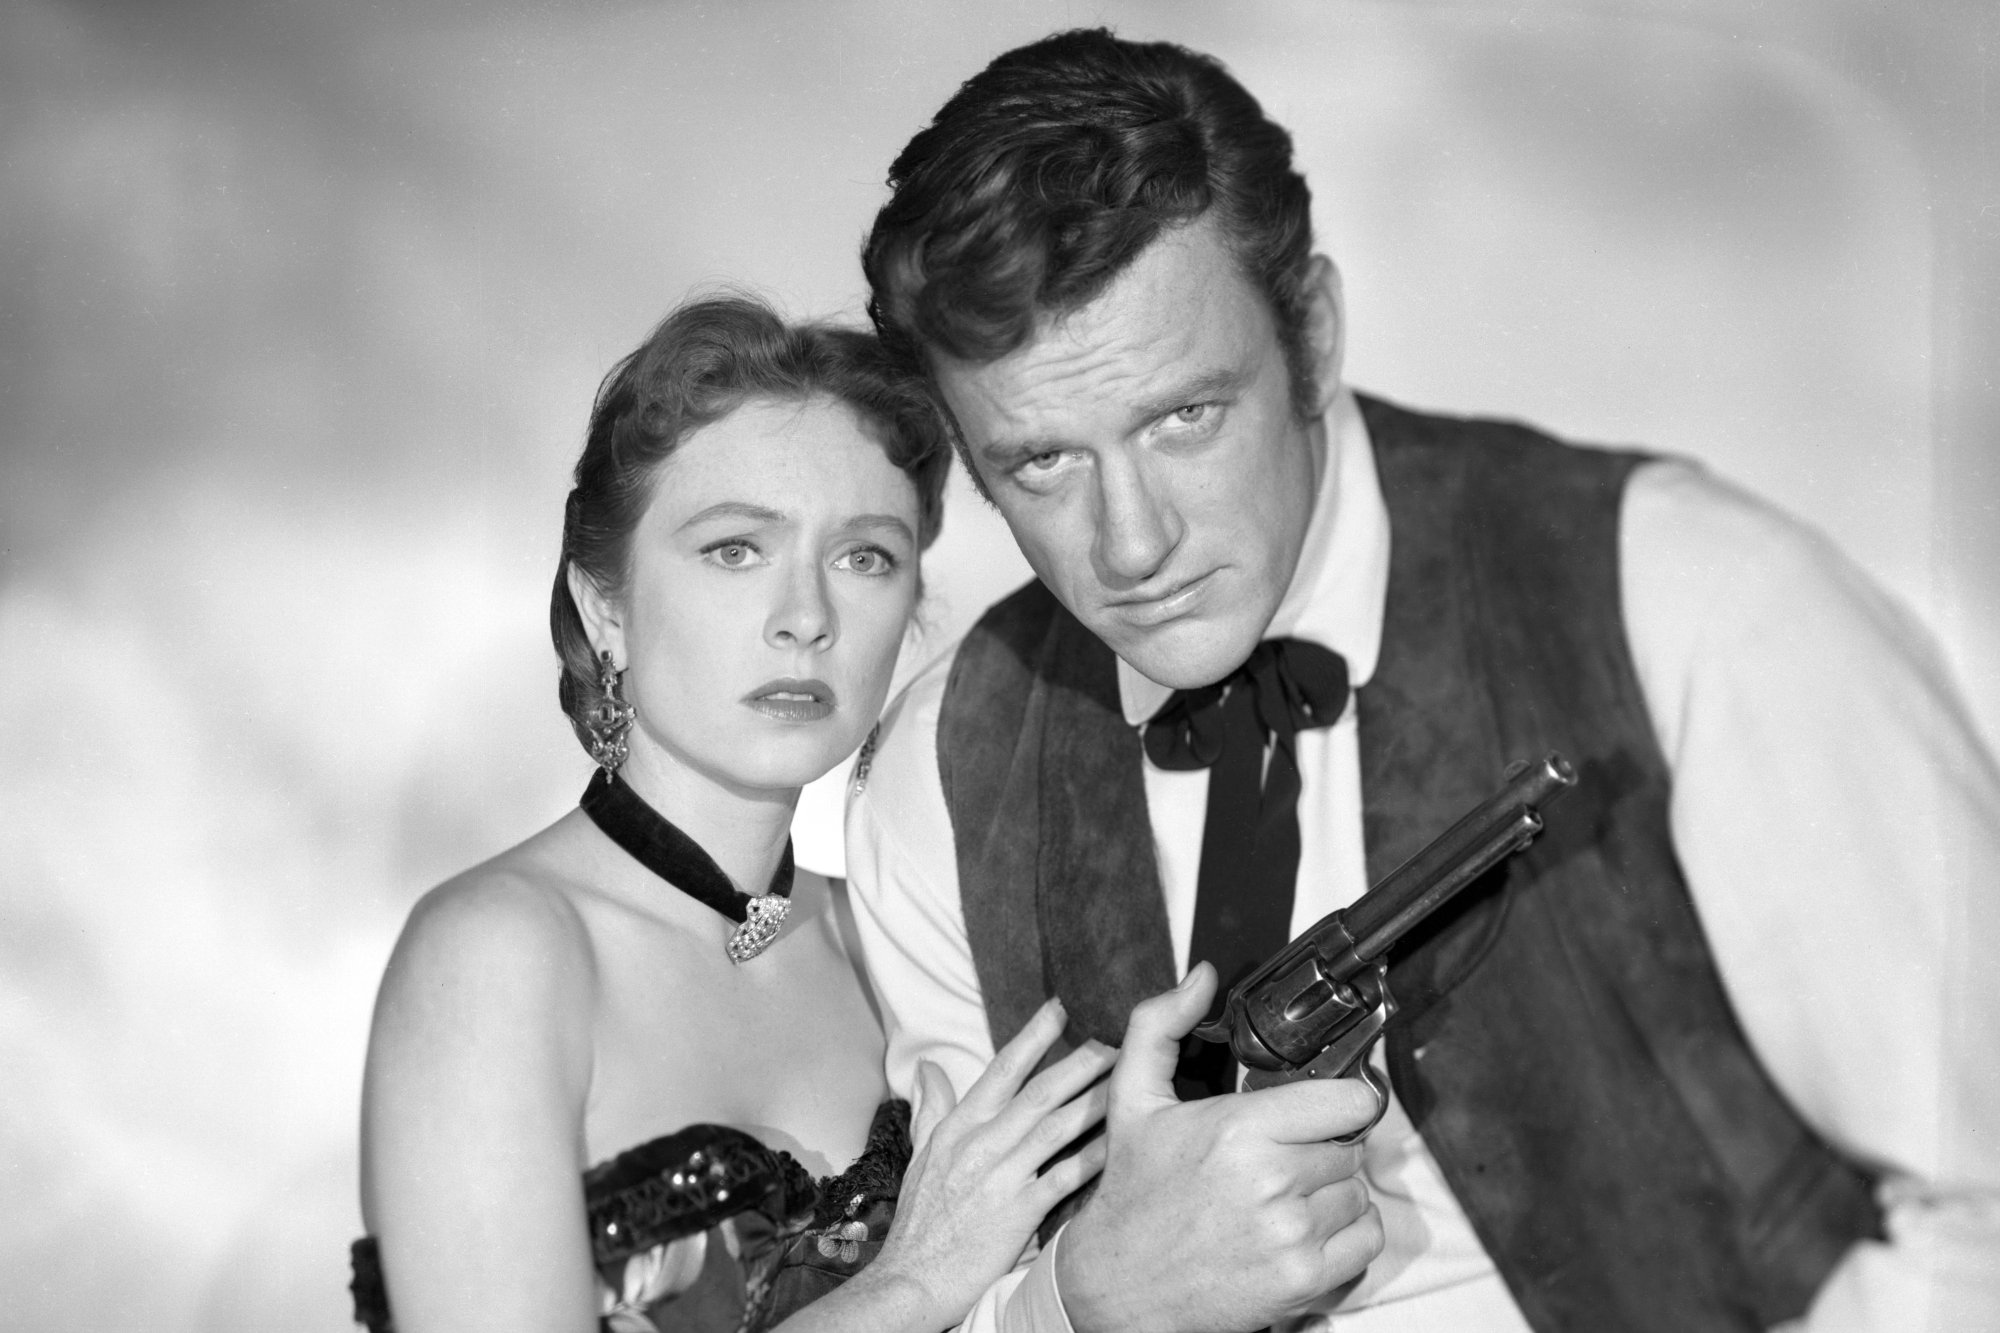 'Gunsmoke' Amanda Blake as Kitty Russell and James Arness as Marshal Matt Dillon. Blake is holding onto Arness' arm looking concerned. He's holding a pistol.